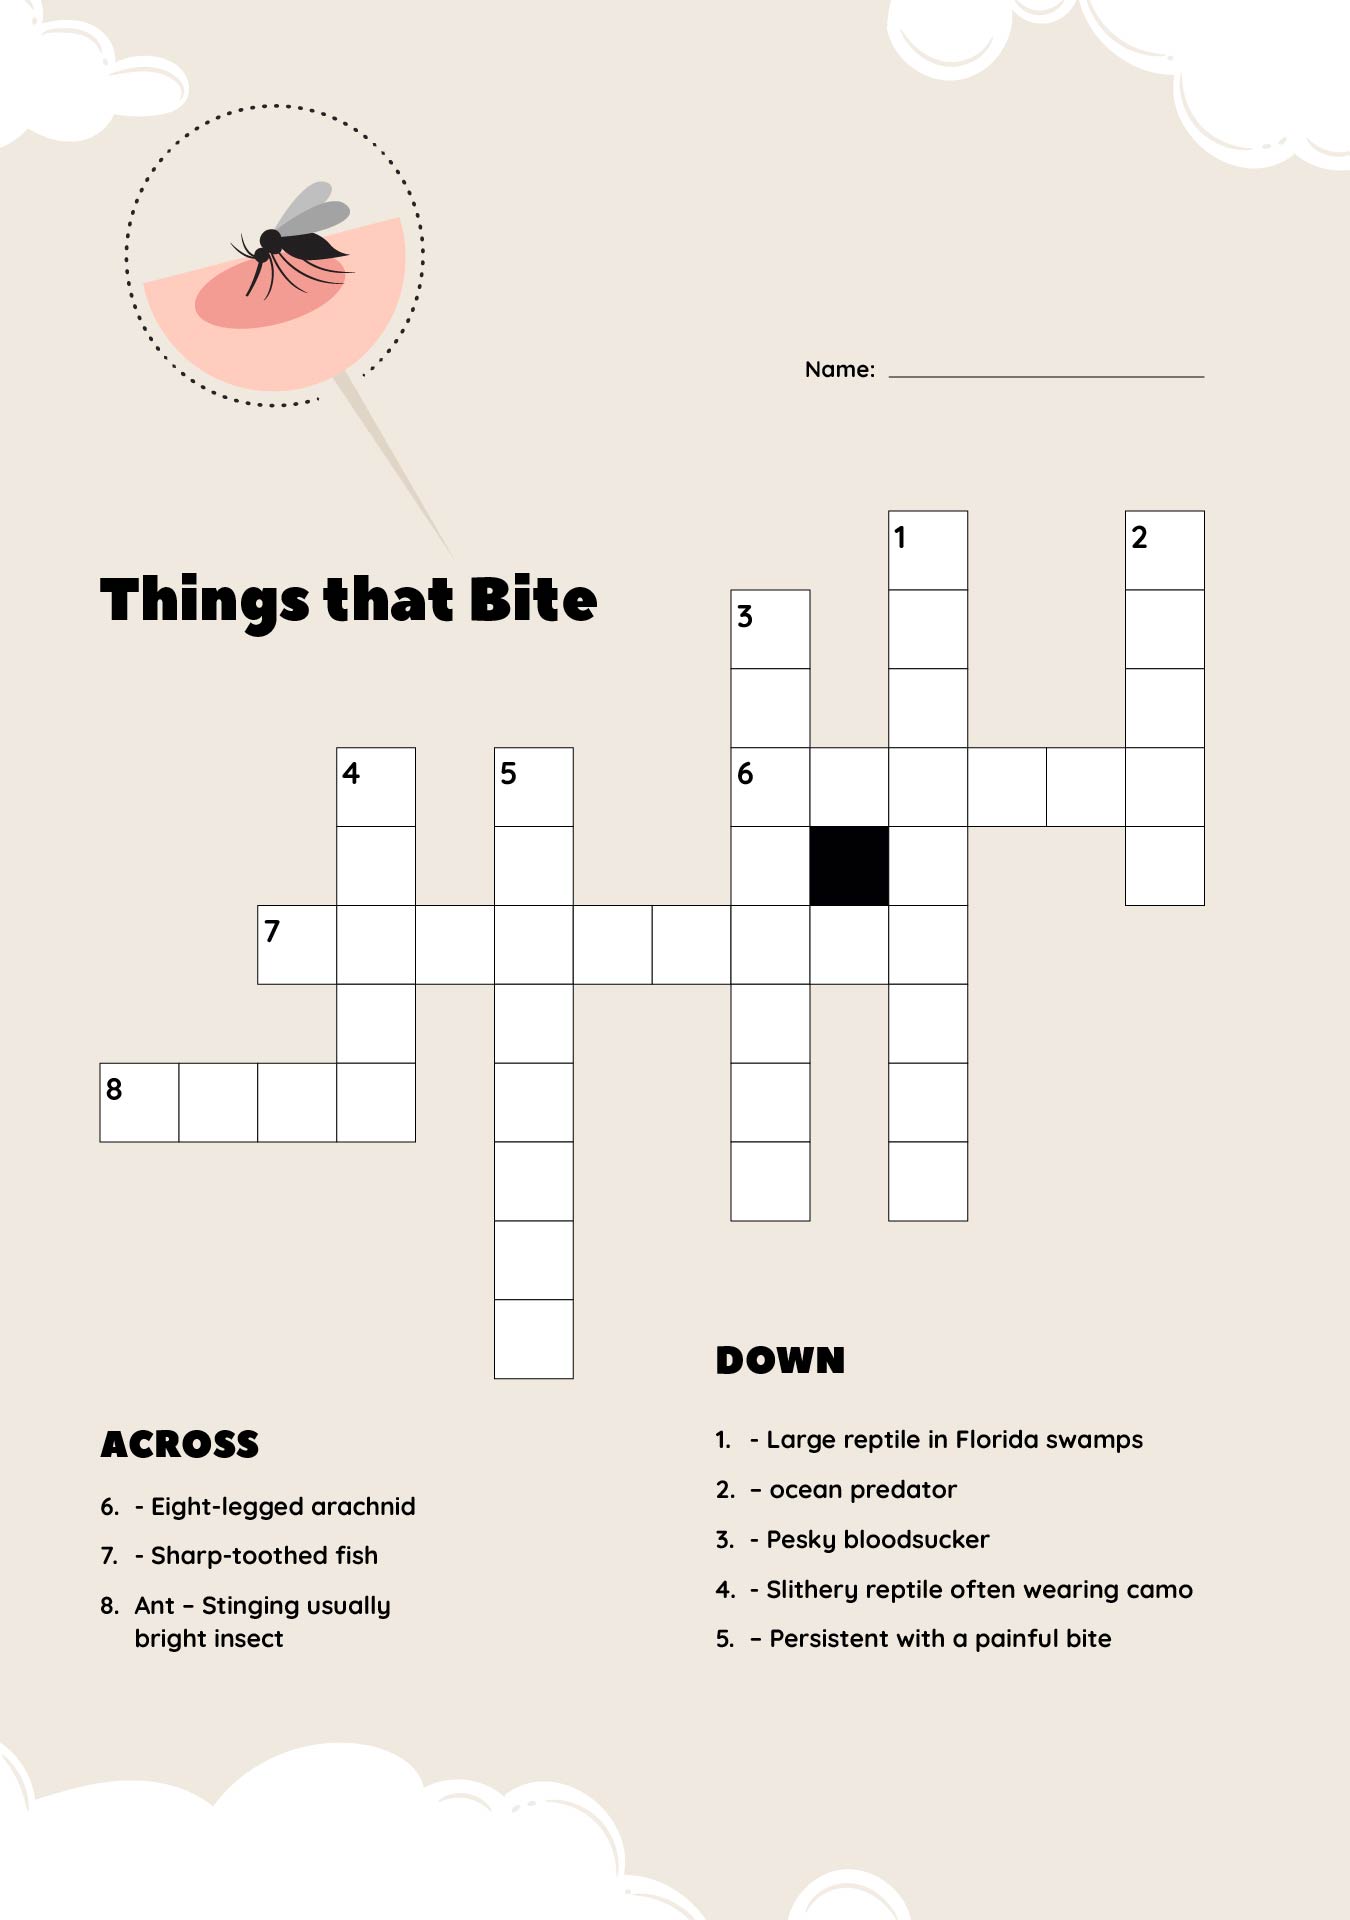 How to Finish a Crossword Puzzle: 6 Steps (with Pictures)